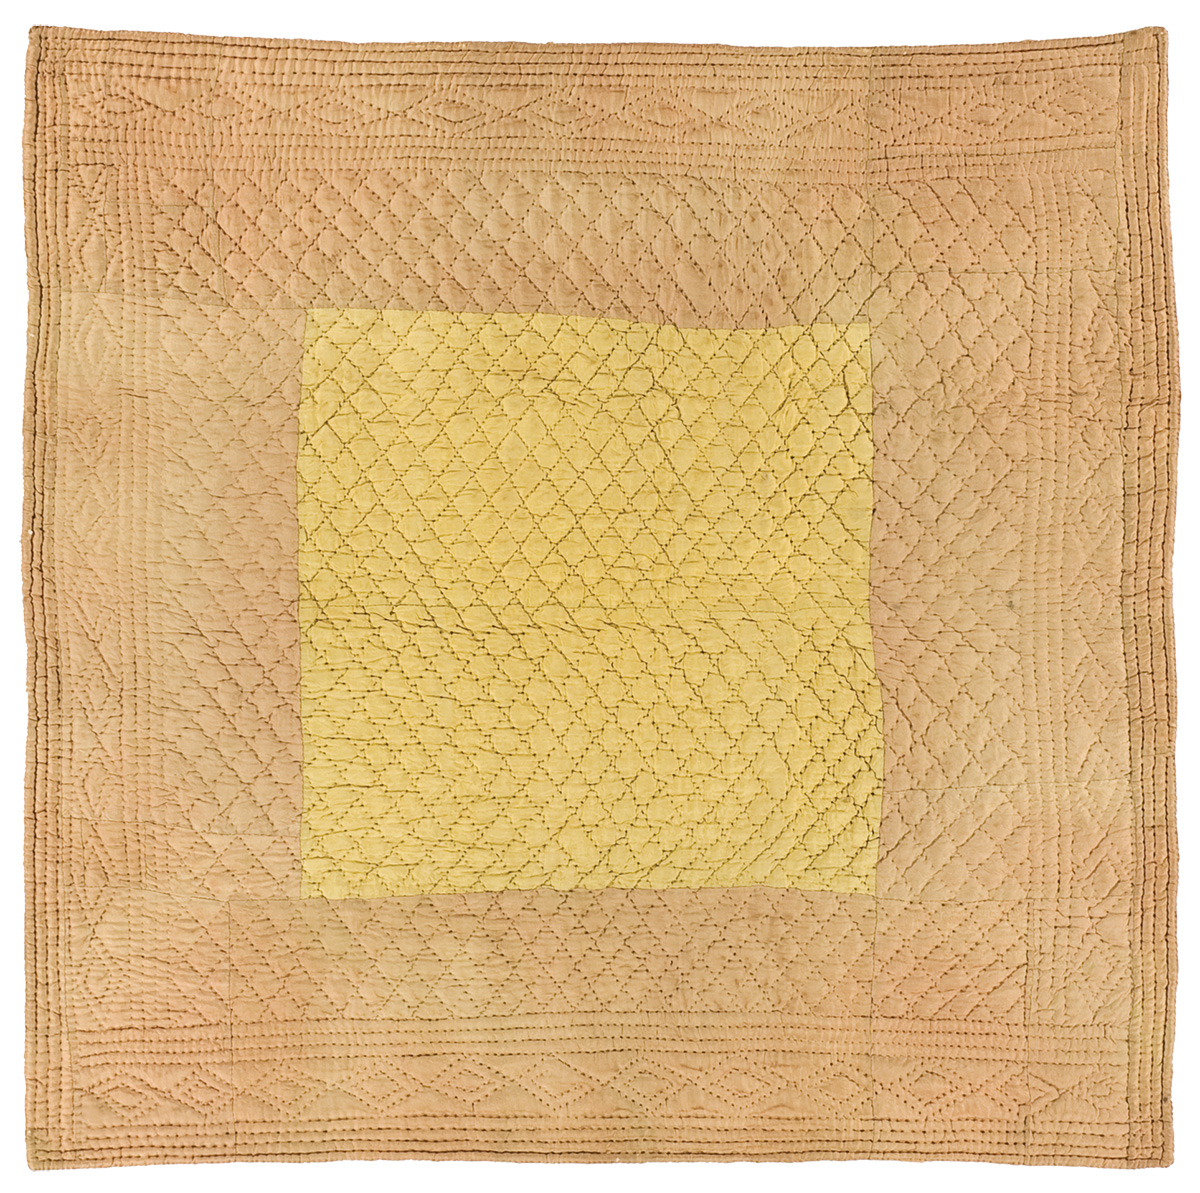 "Color and Contour," opening at the International Quilt Study Center & Museum on June 15, highlights and explores antique French quilts, like this "Vanne" made circa 1850-1900 in Provence.